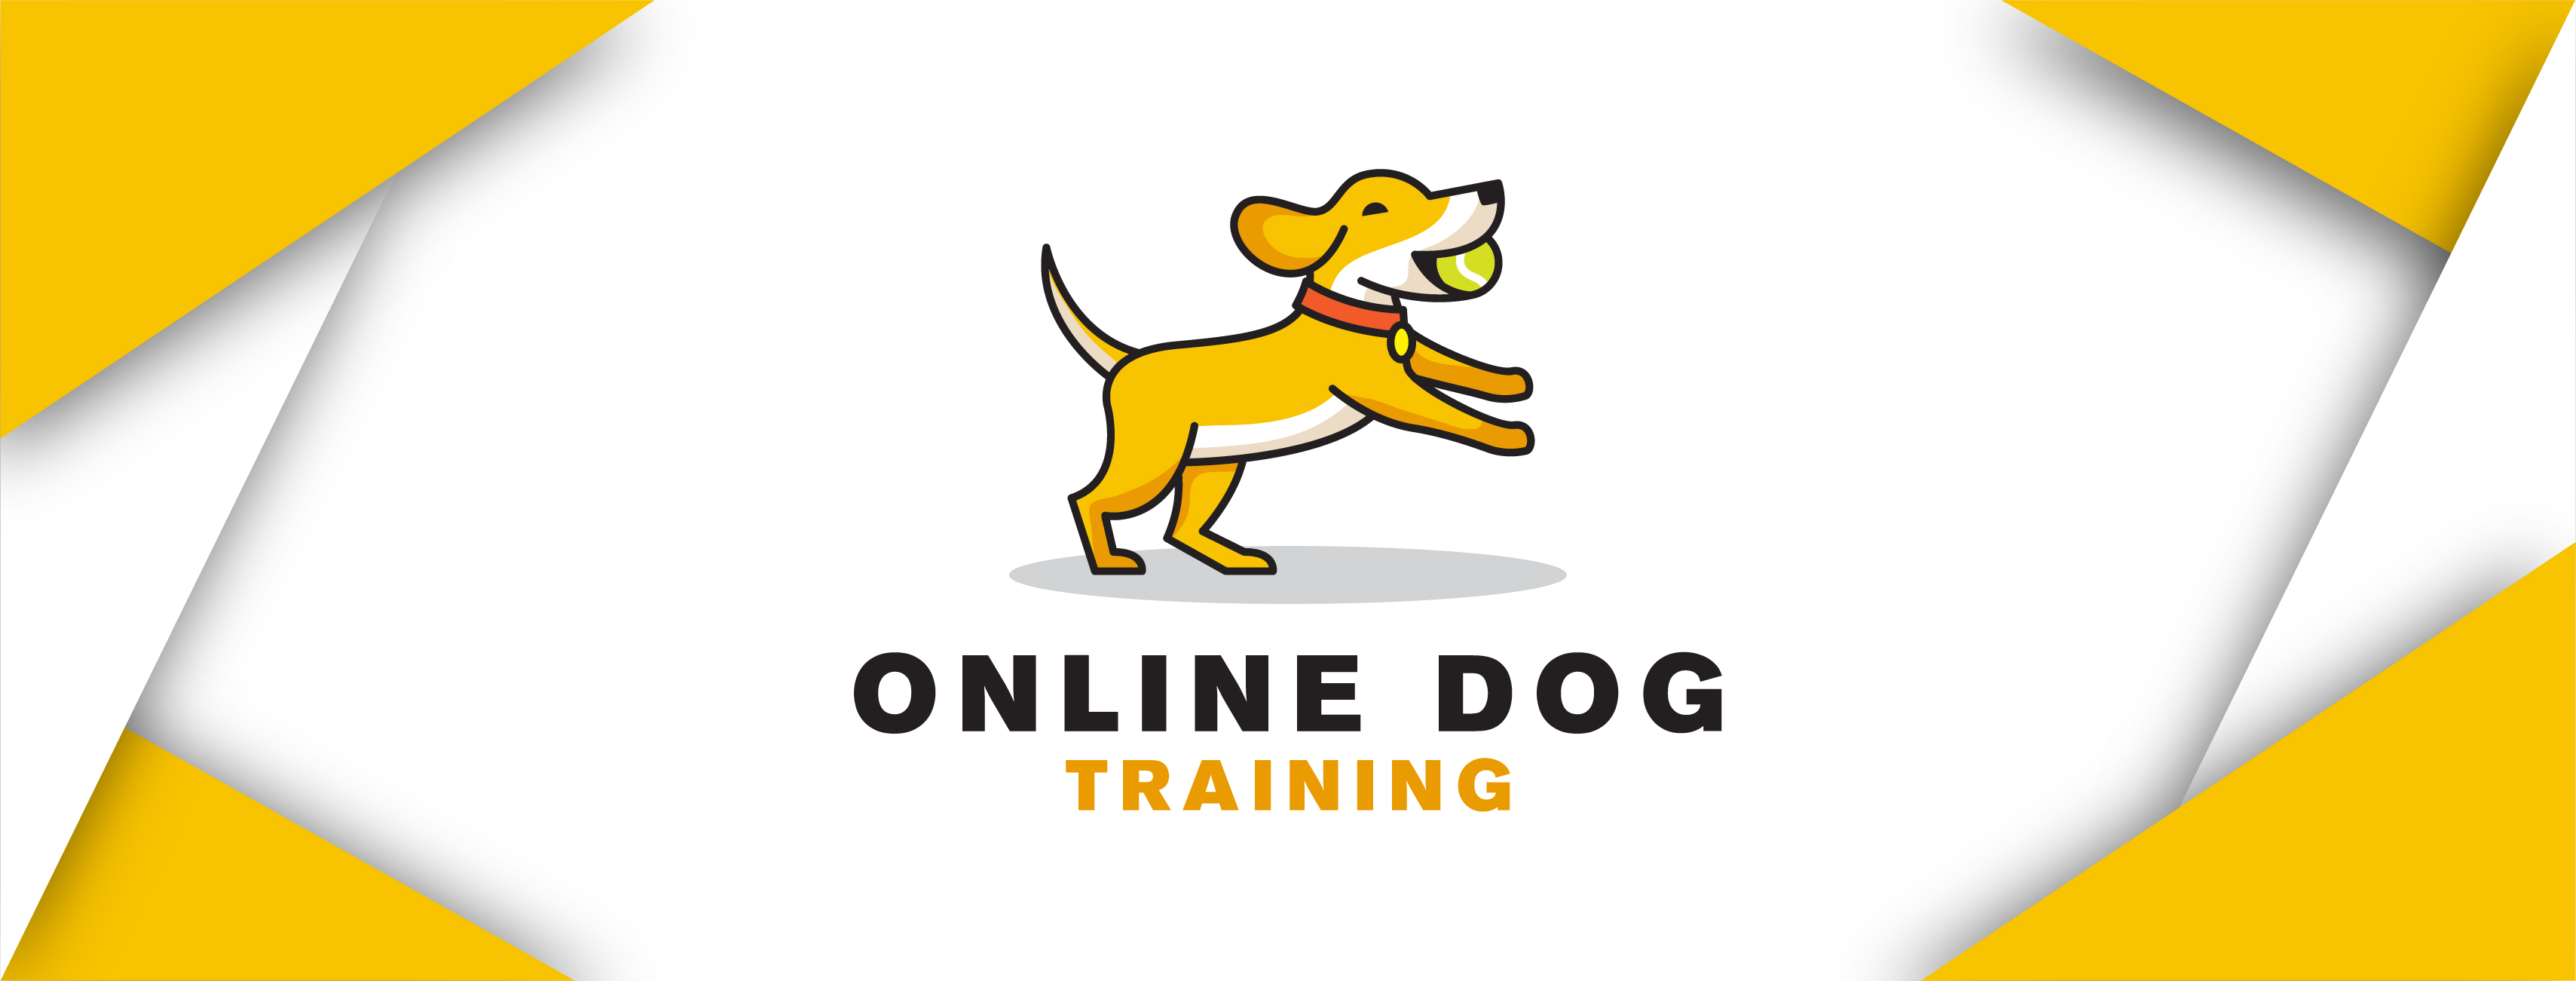 Online Dog Training Launches New Online Workshop to Help Train a Puppy